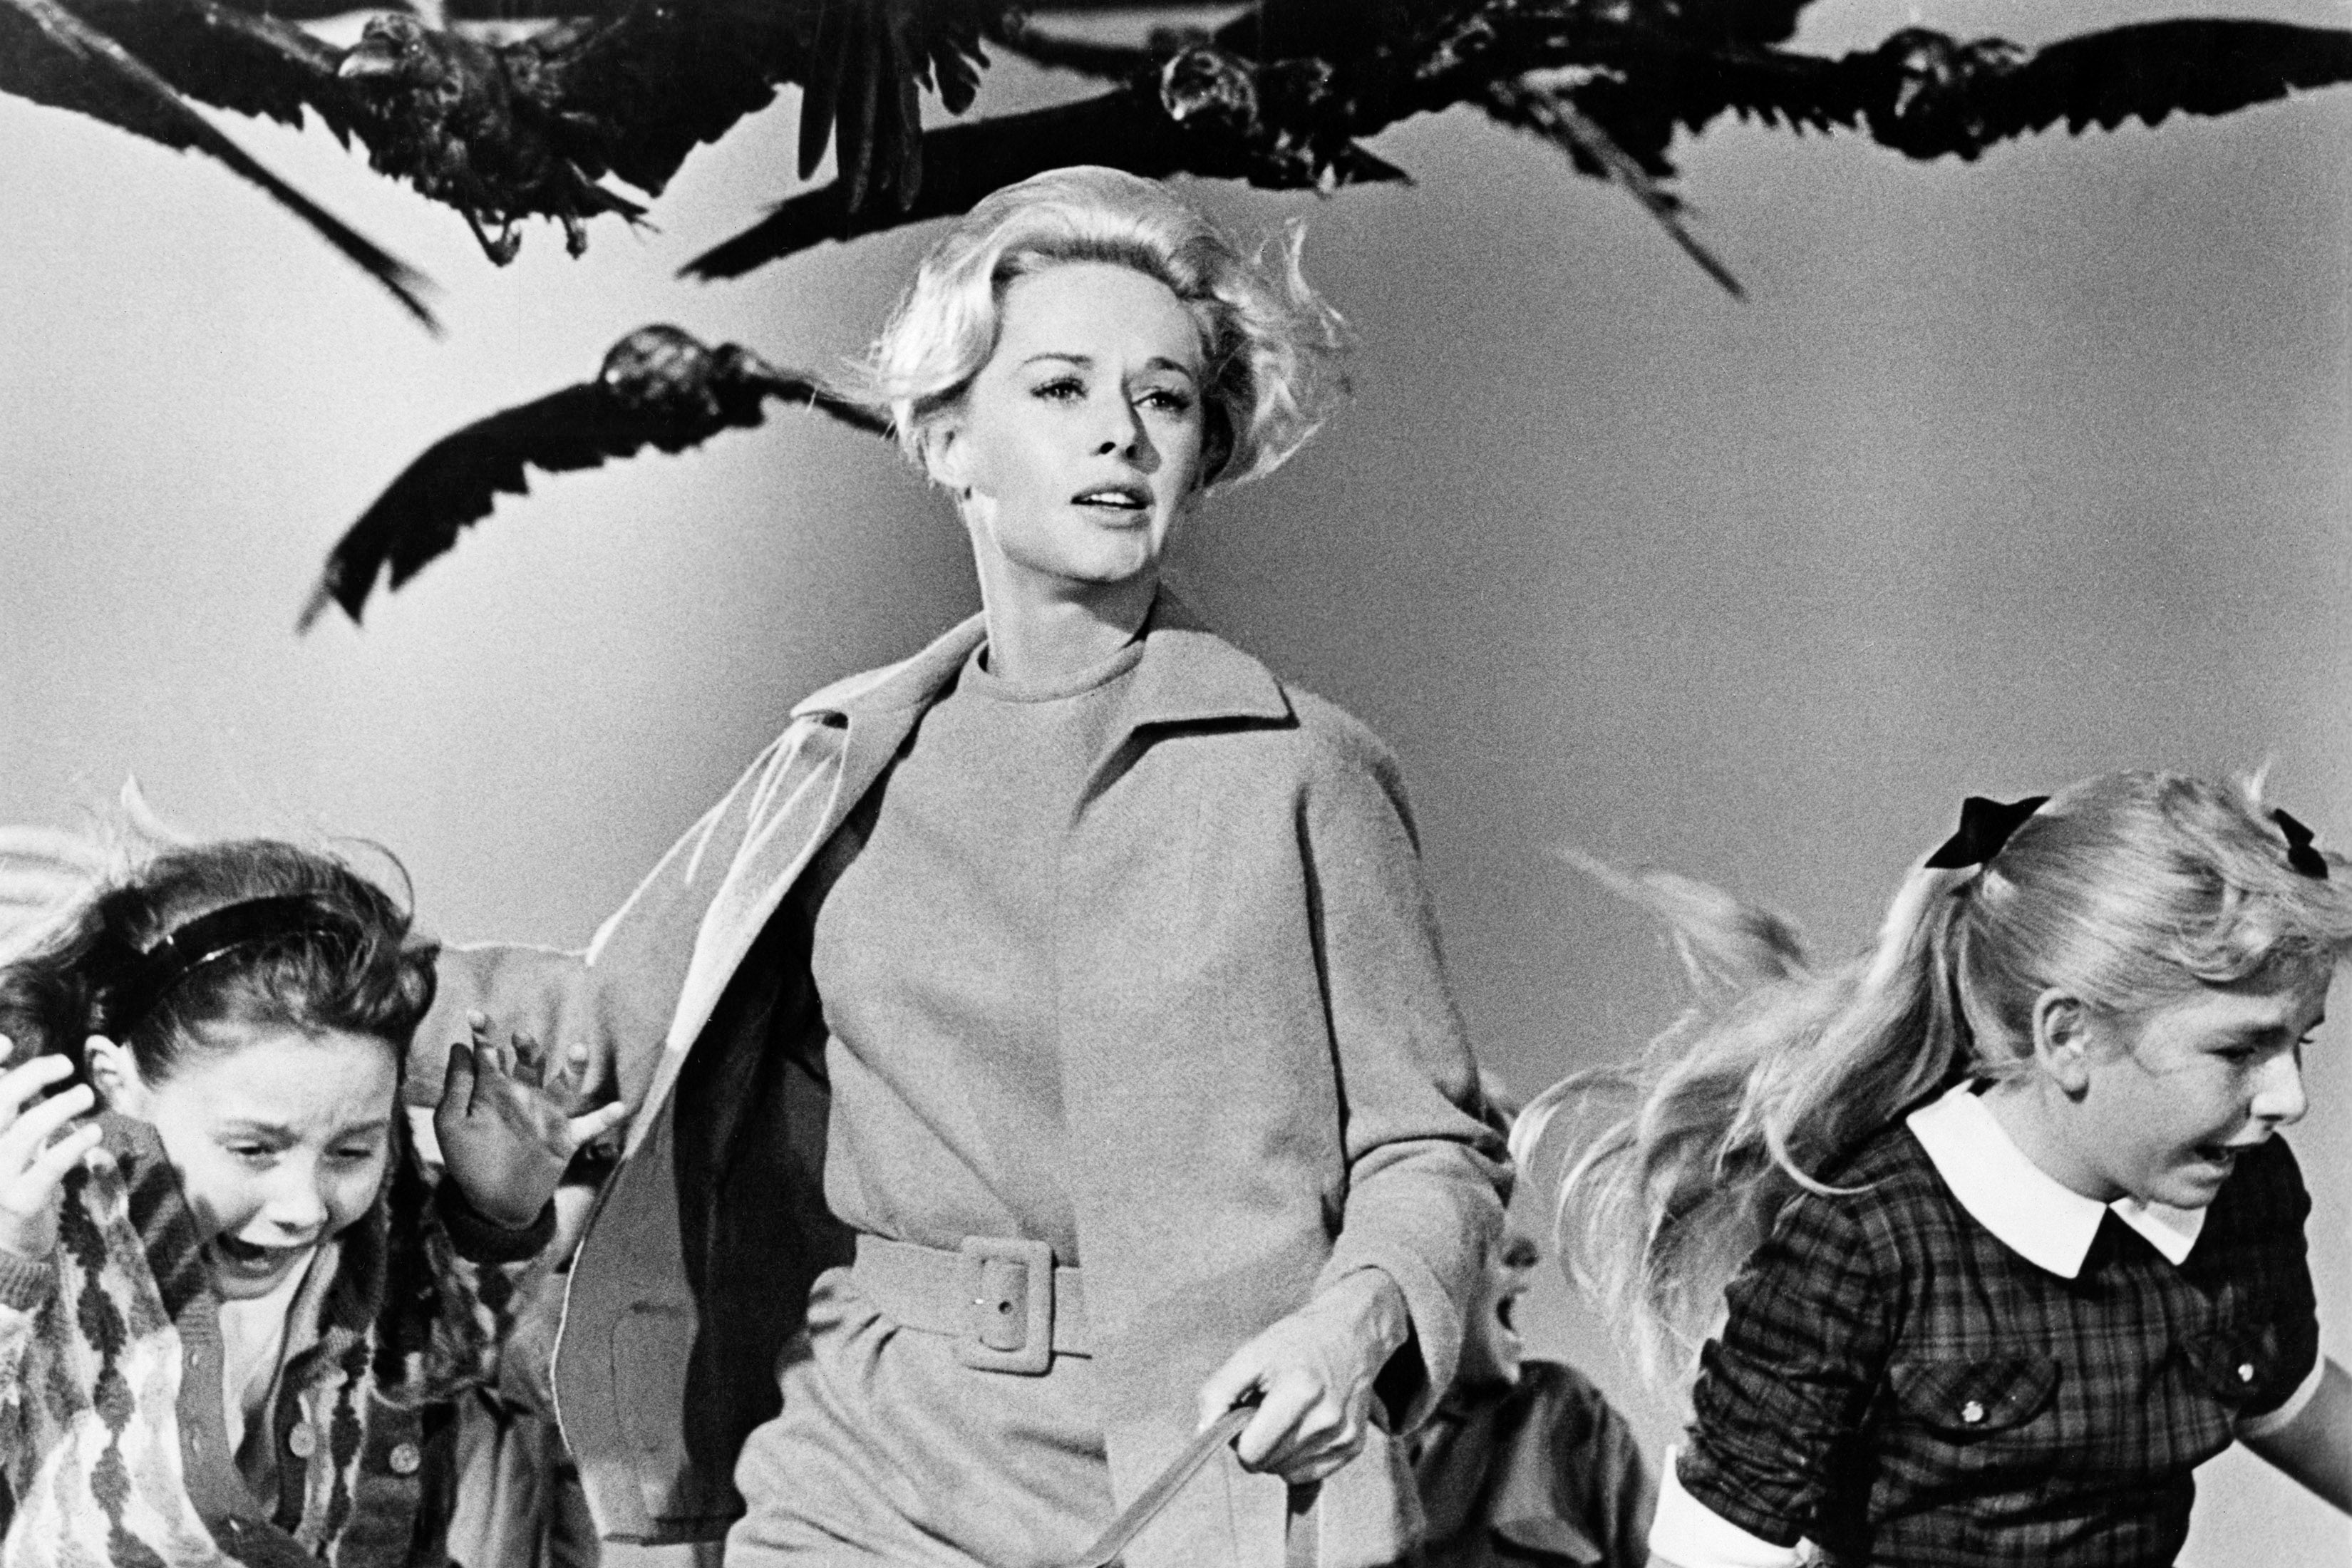 In black and white, an adult women runs along with two screaming girls as birds loom behind them. 